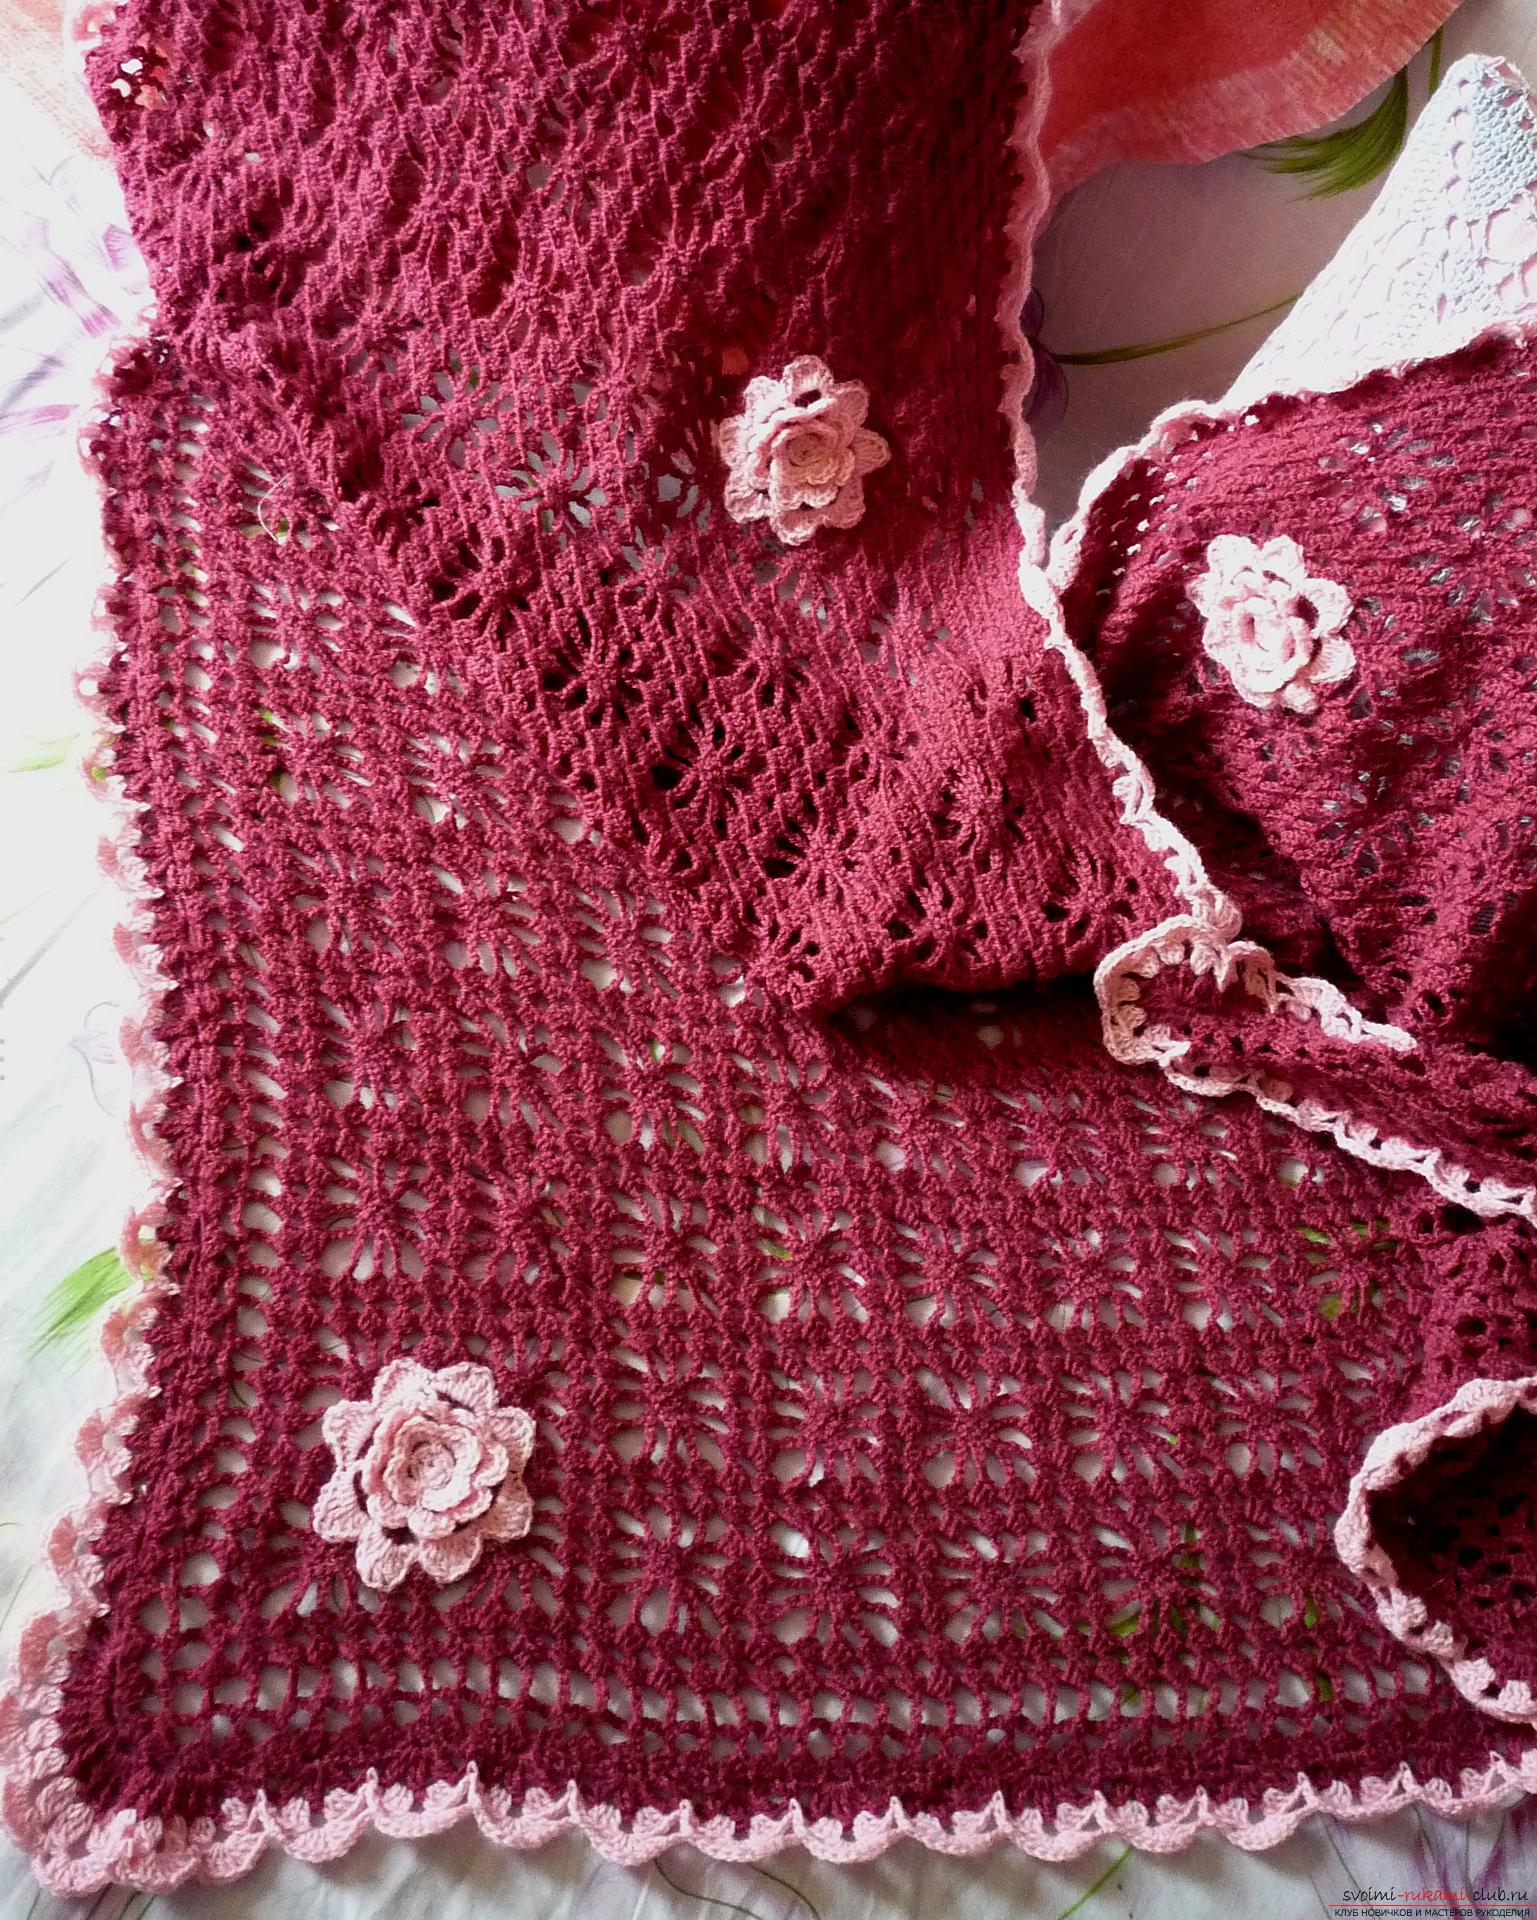 This master class of crocheting contains a crochet flower scheme for a plaid .. Photo # 14